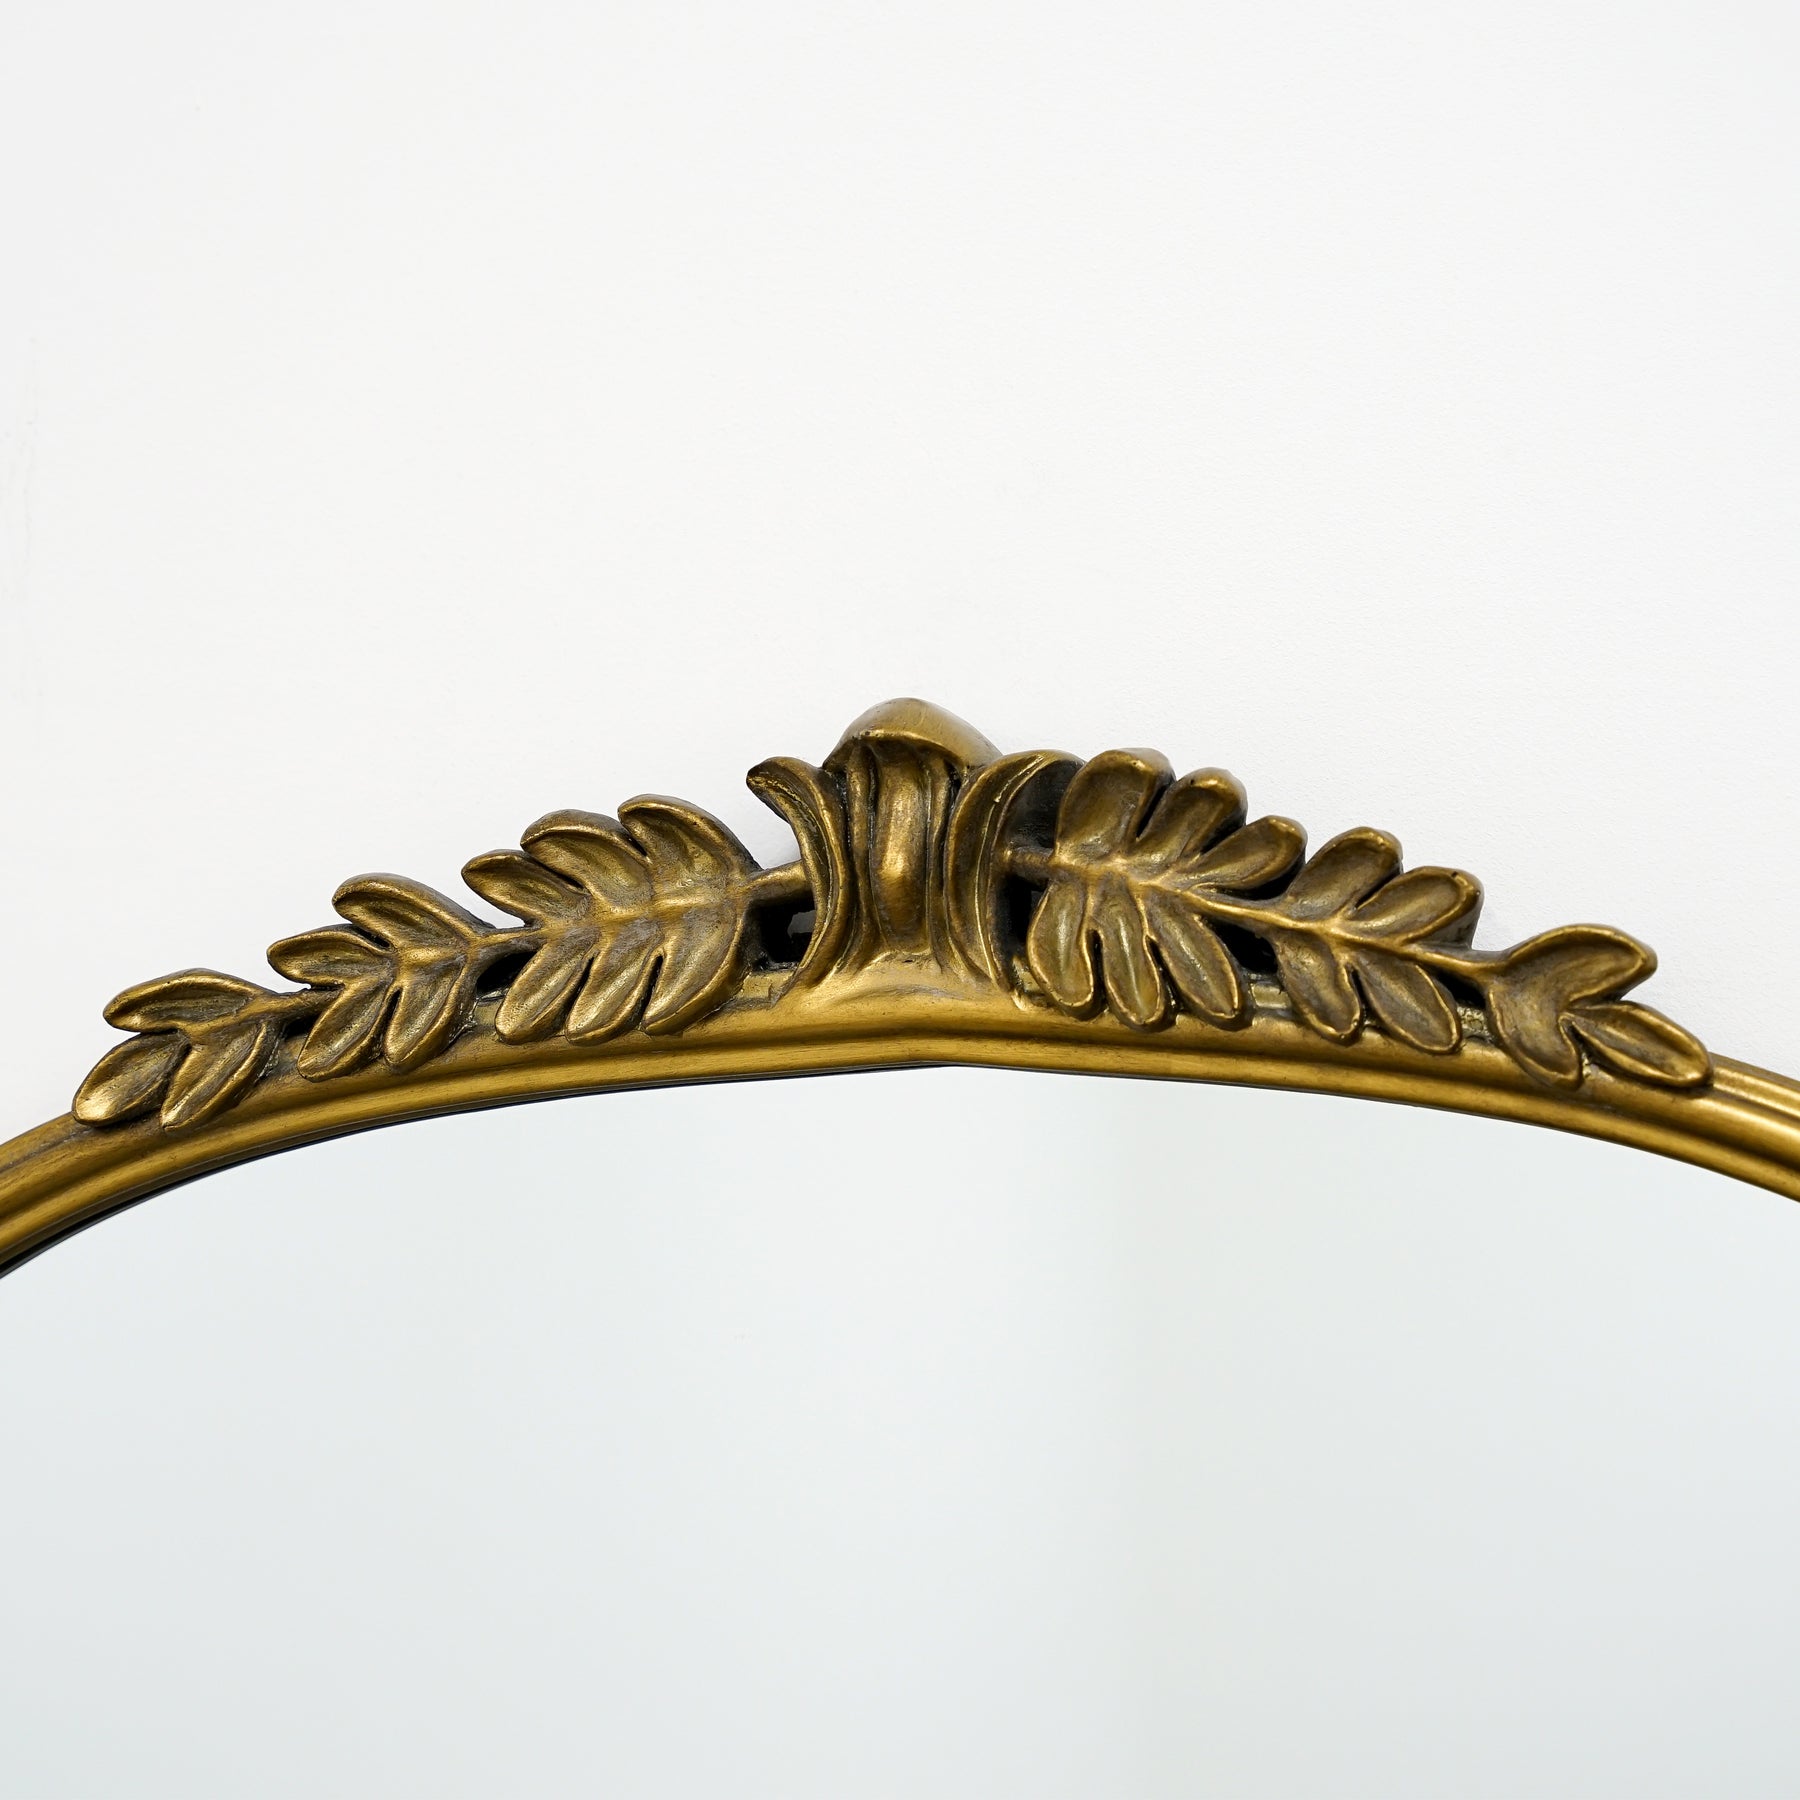 Detail shot of Full Length Gold Arched Ornate Metal Mirror top crest